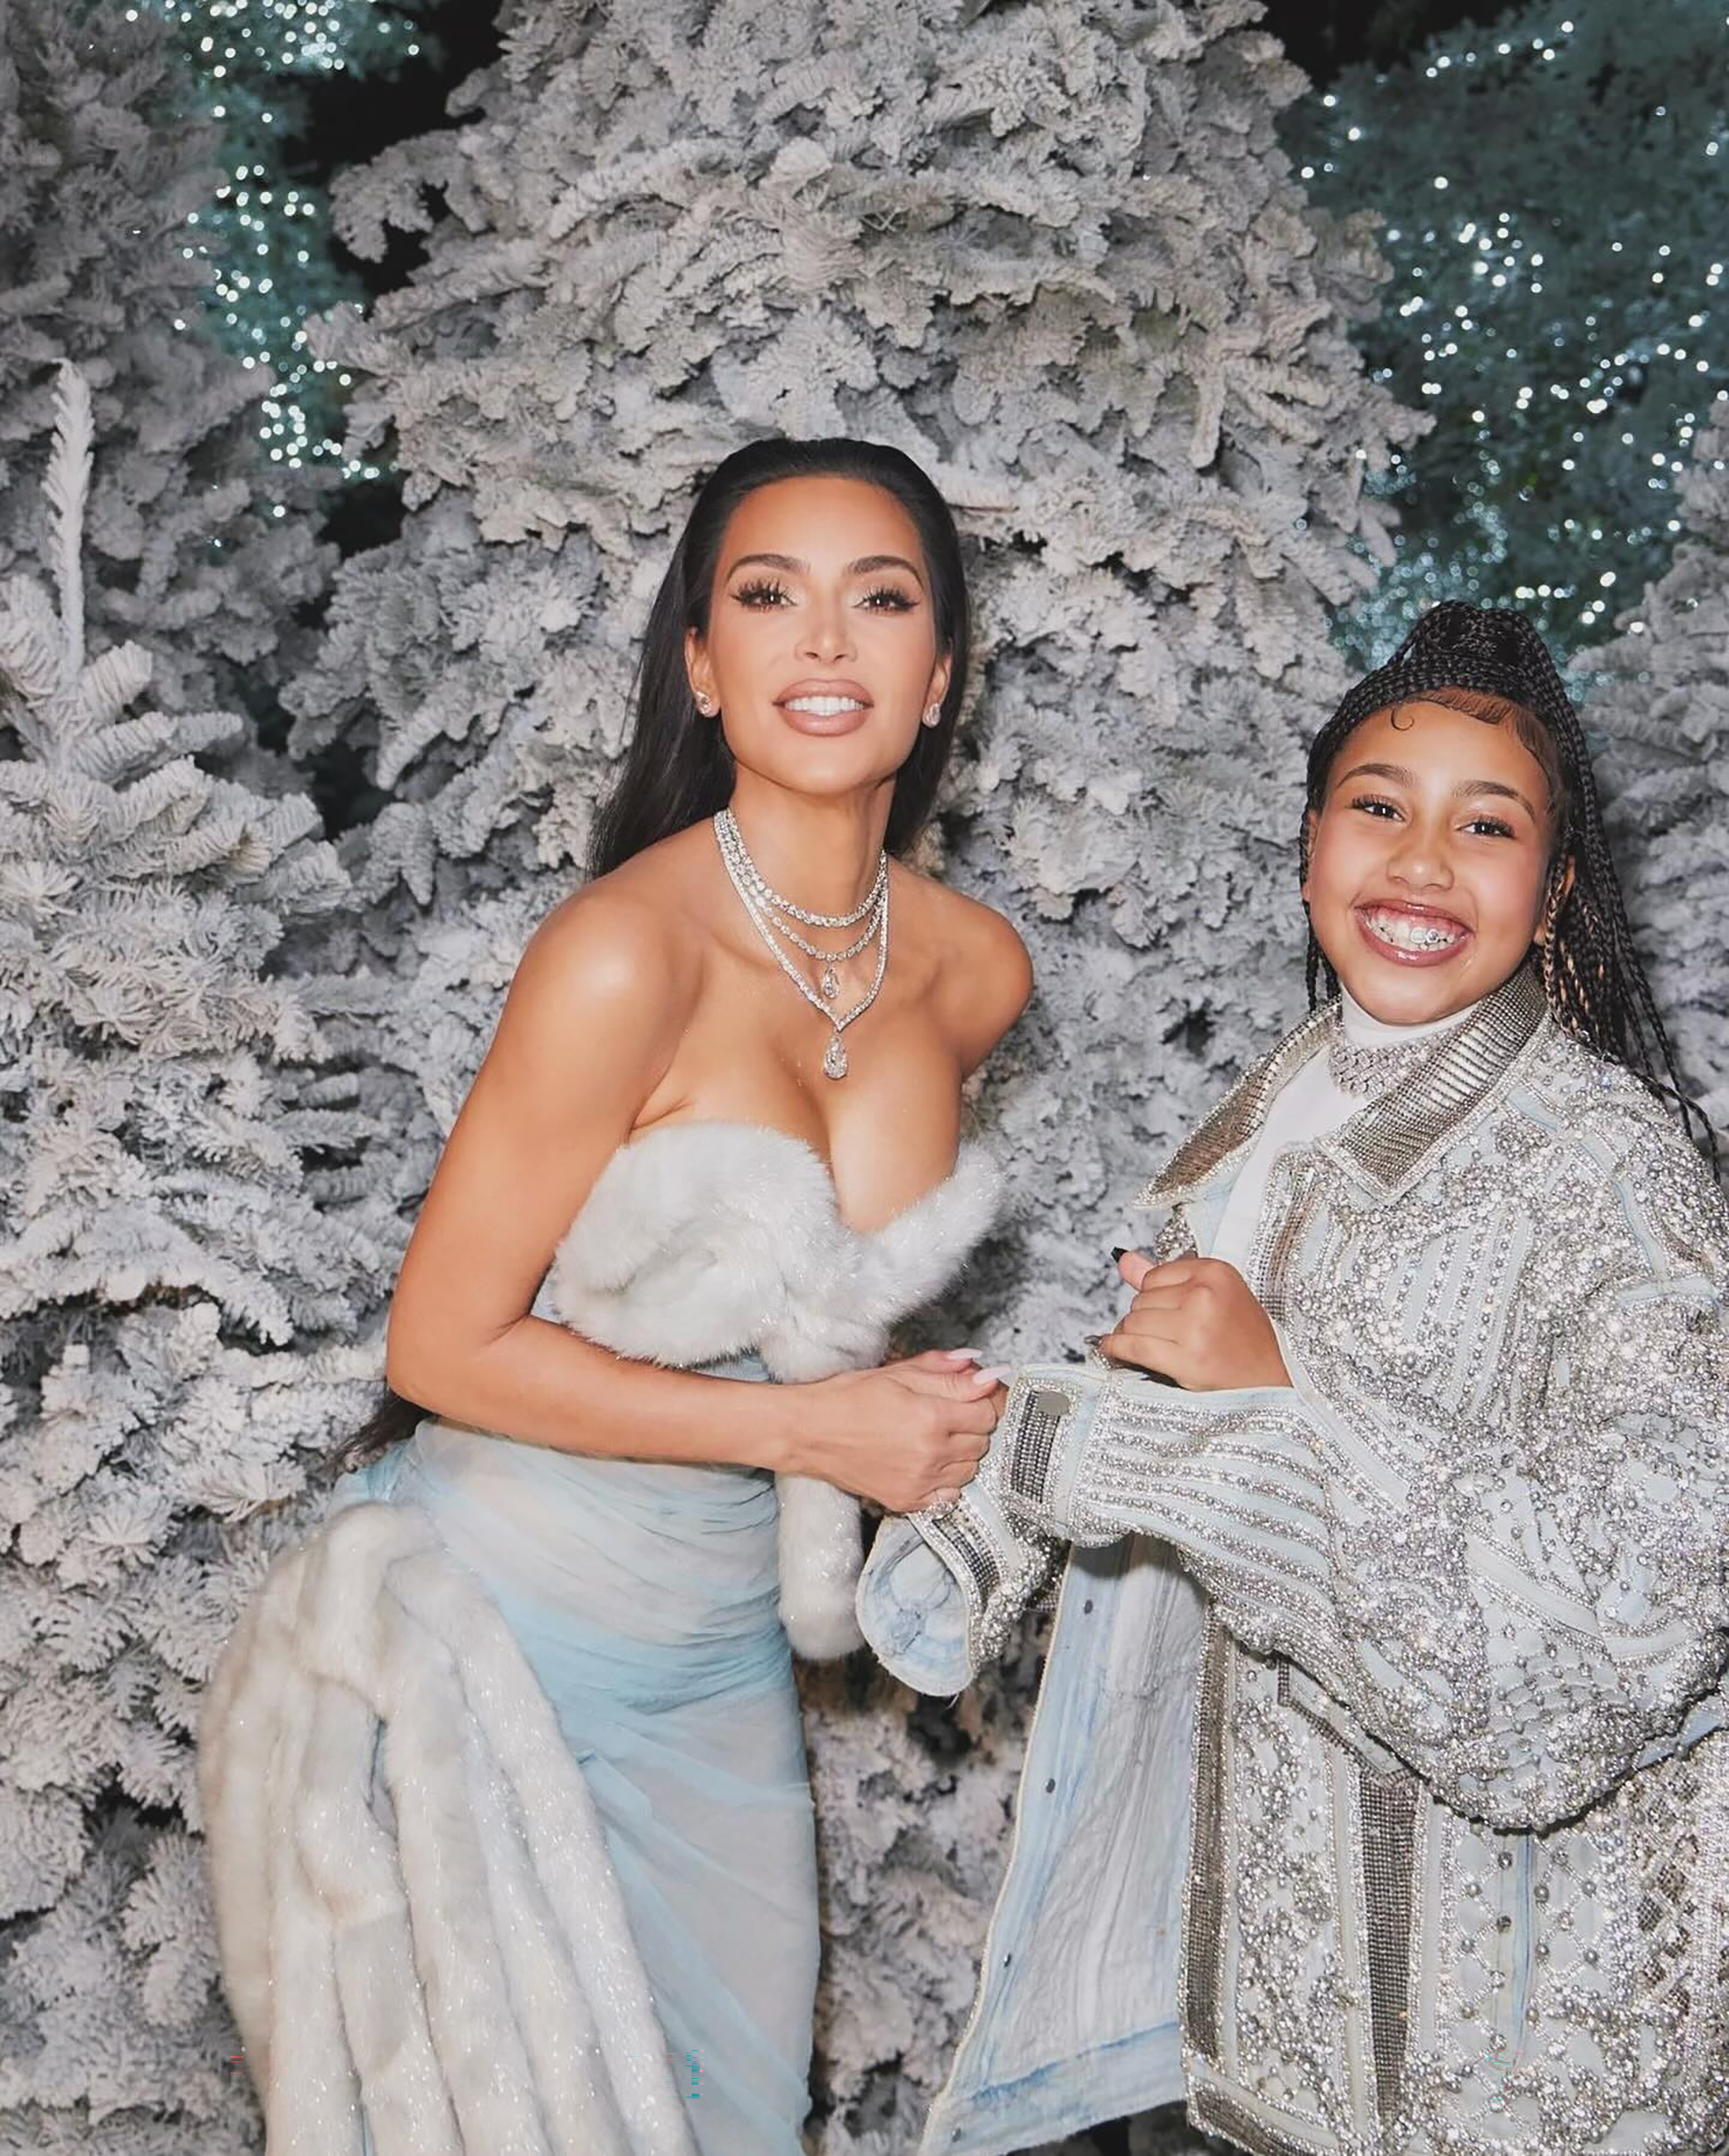 Kim Kardashian transformed herself into a snow queen for this pic, taken with daughter North